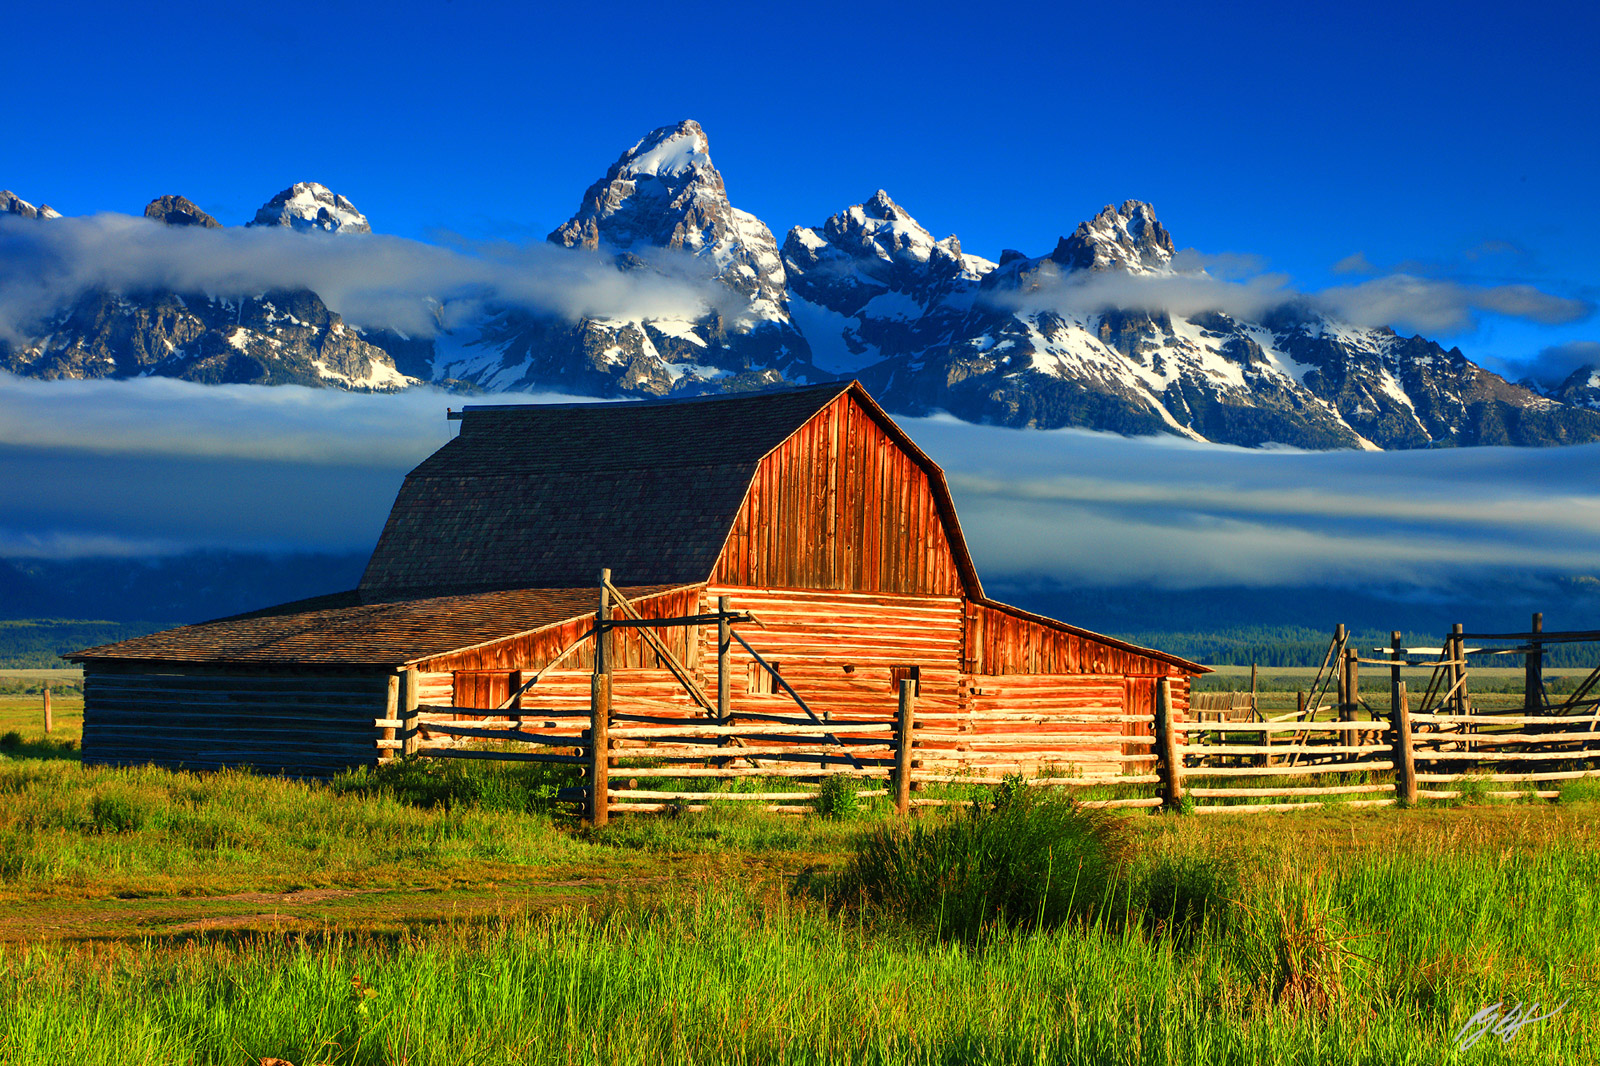 Barn and Grand Tetons in Mormon Row in Grand Teton National Park in Wyoming